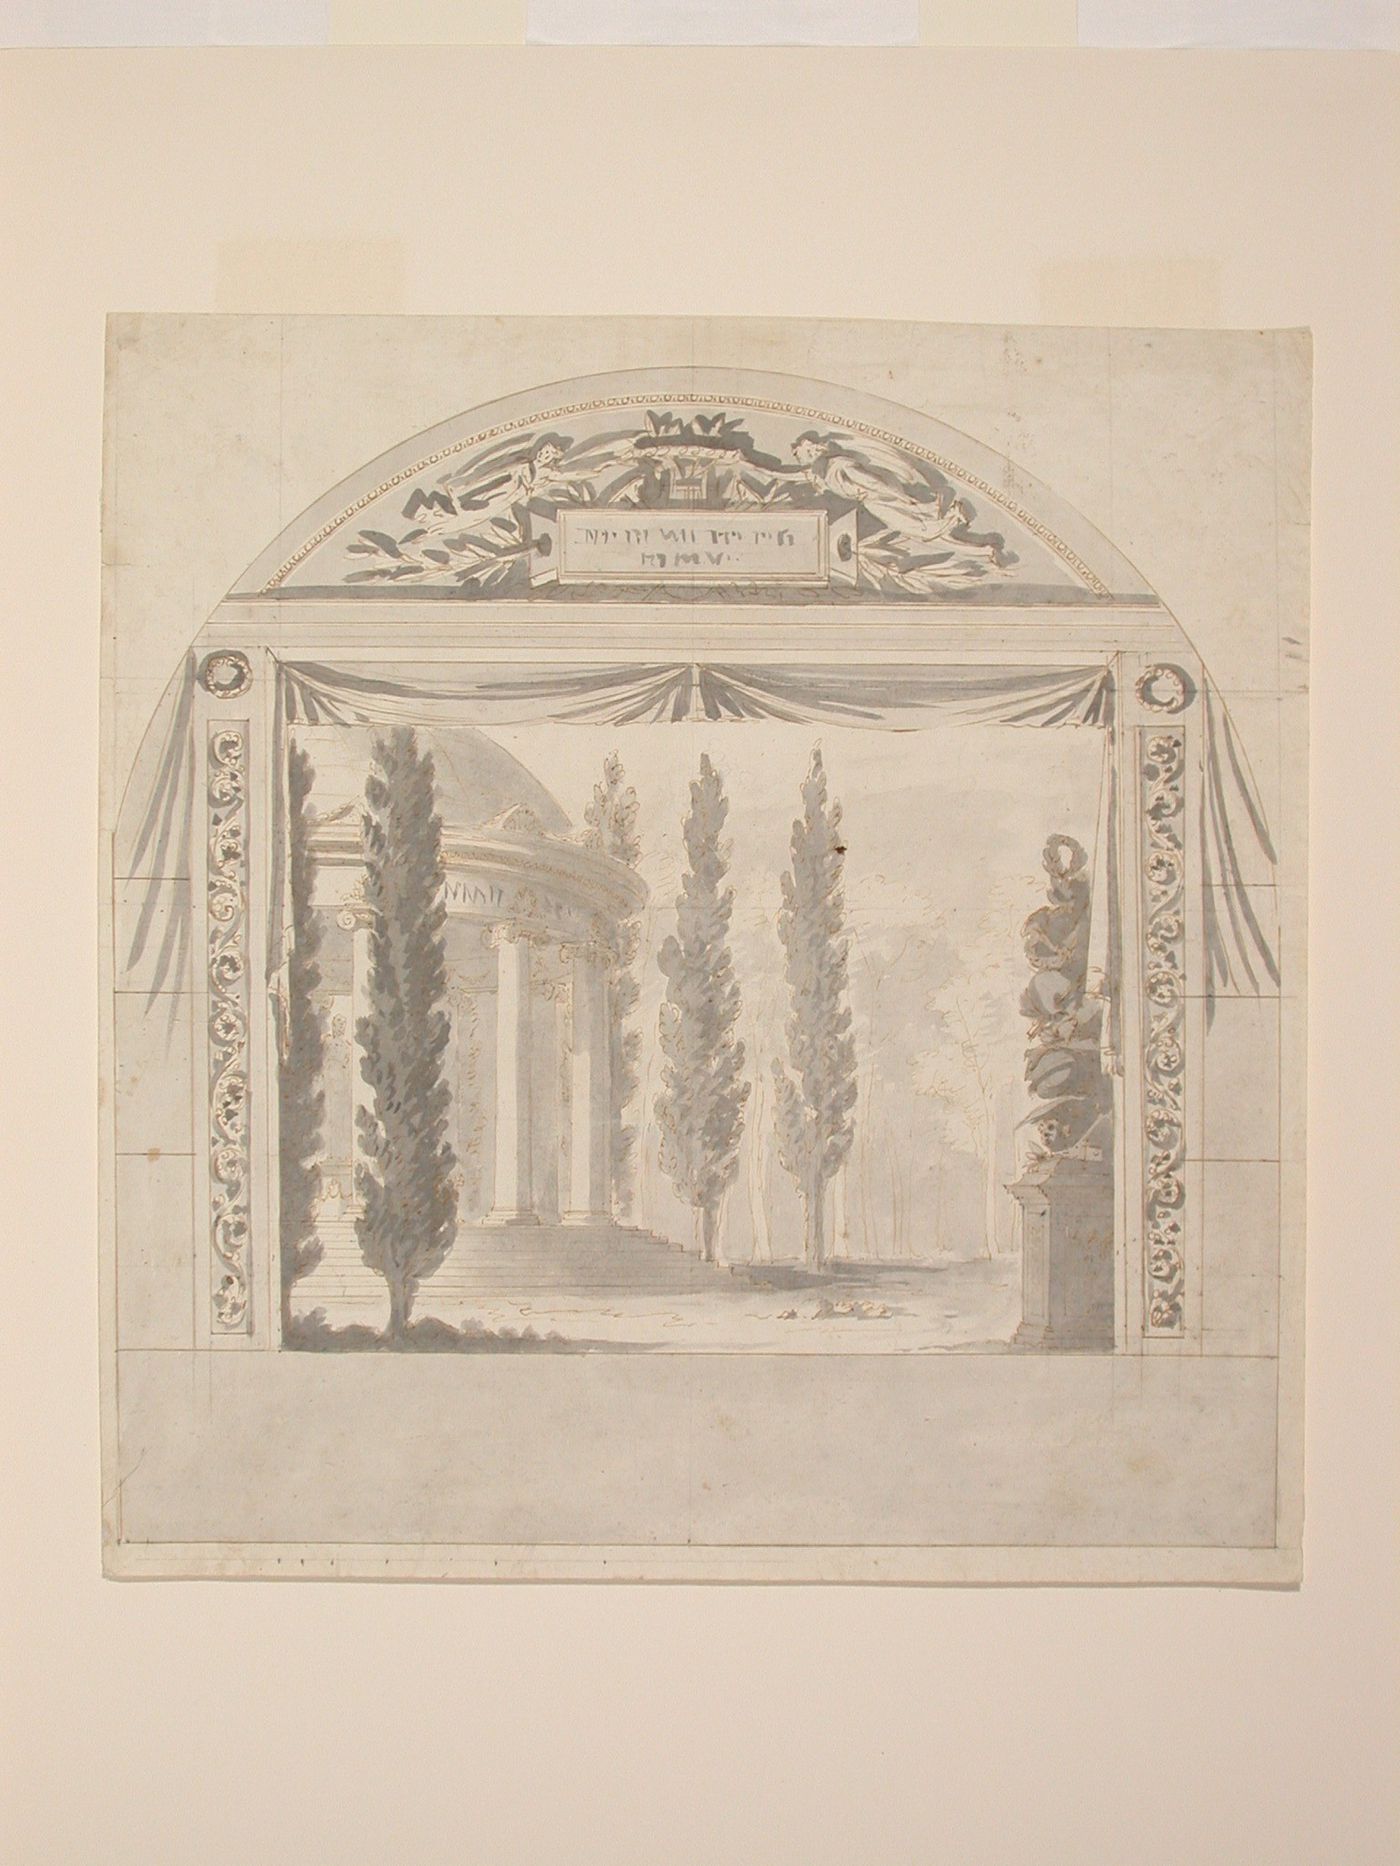 Design for a stage curtain-screen (sipario) with flying angels in an arched pediment above, and a representation of a tempietto in a landscape